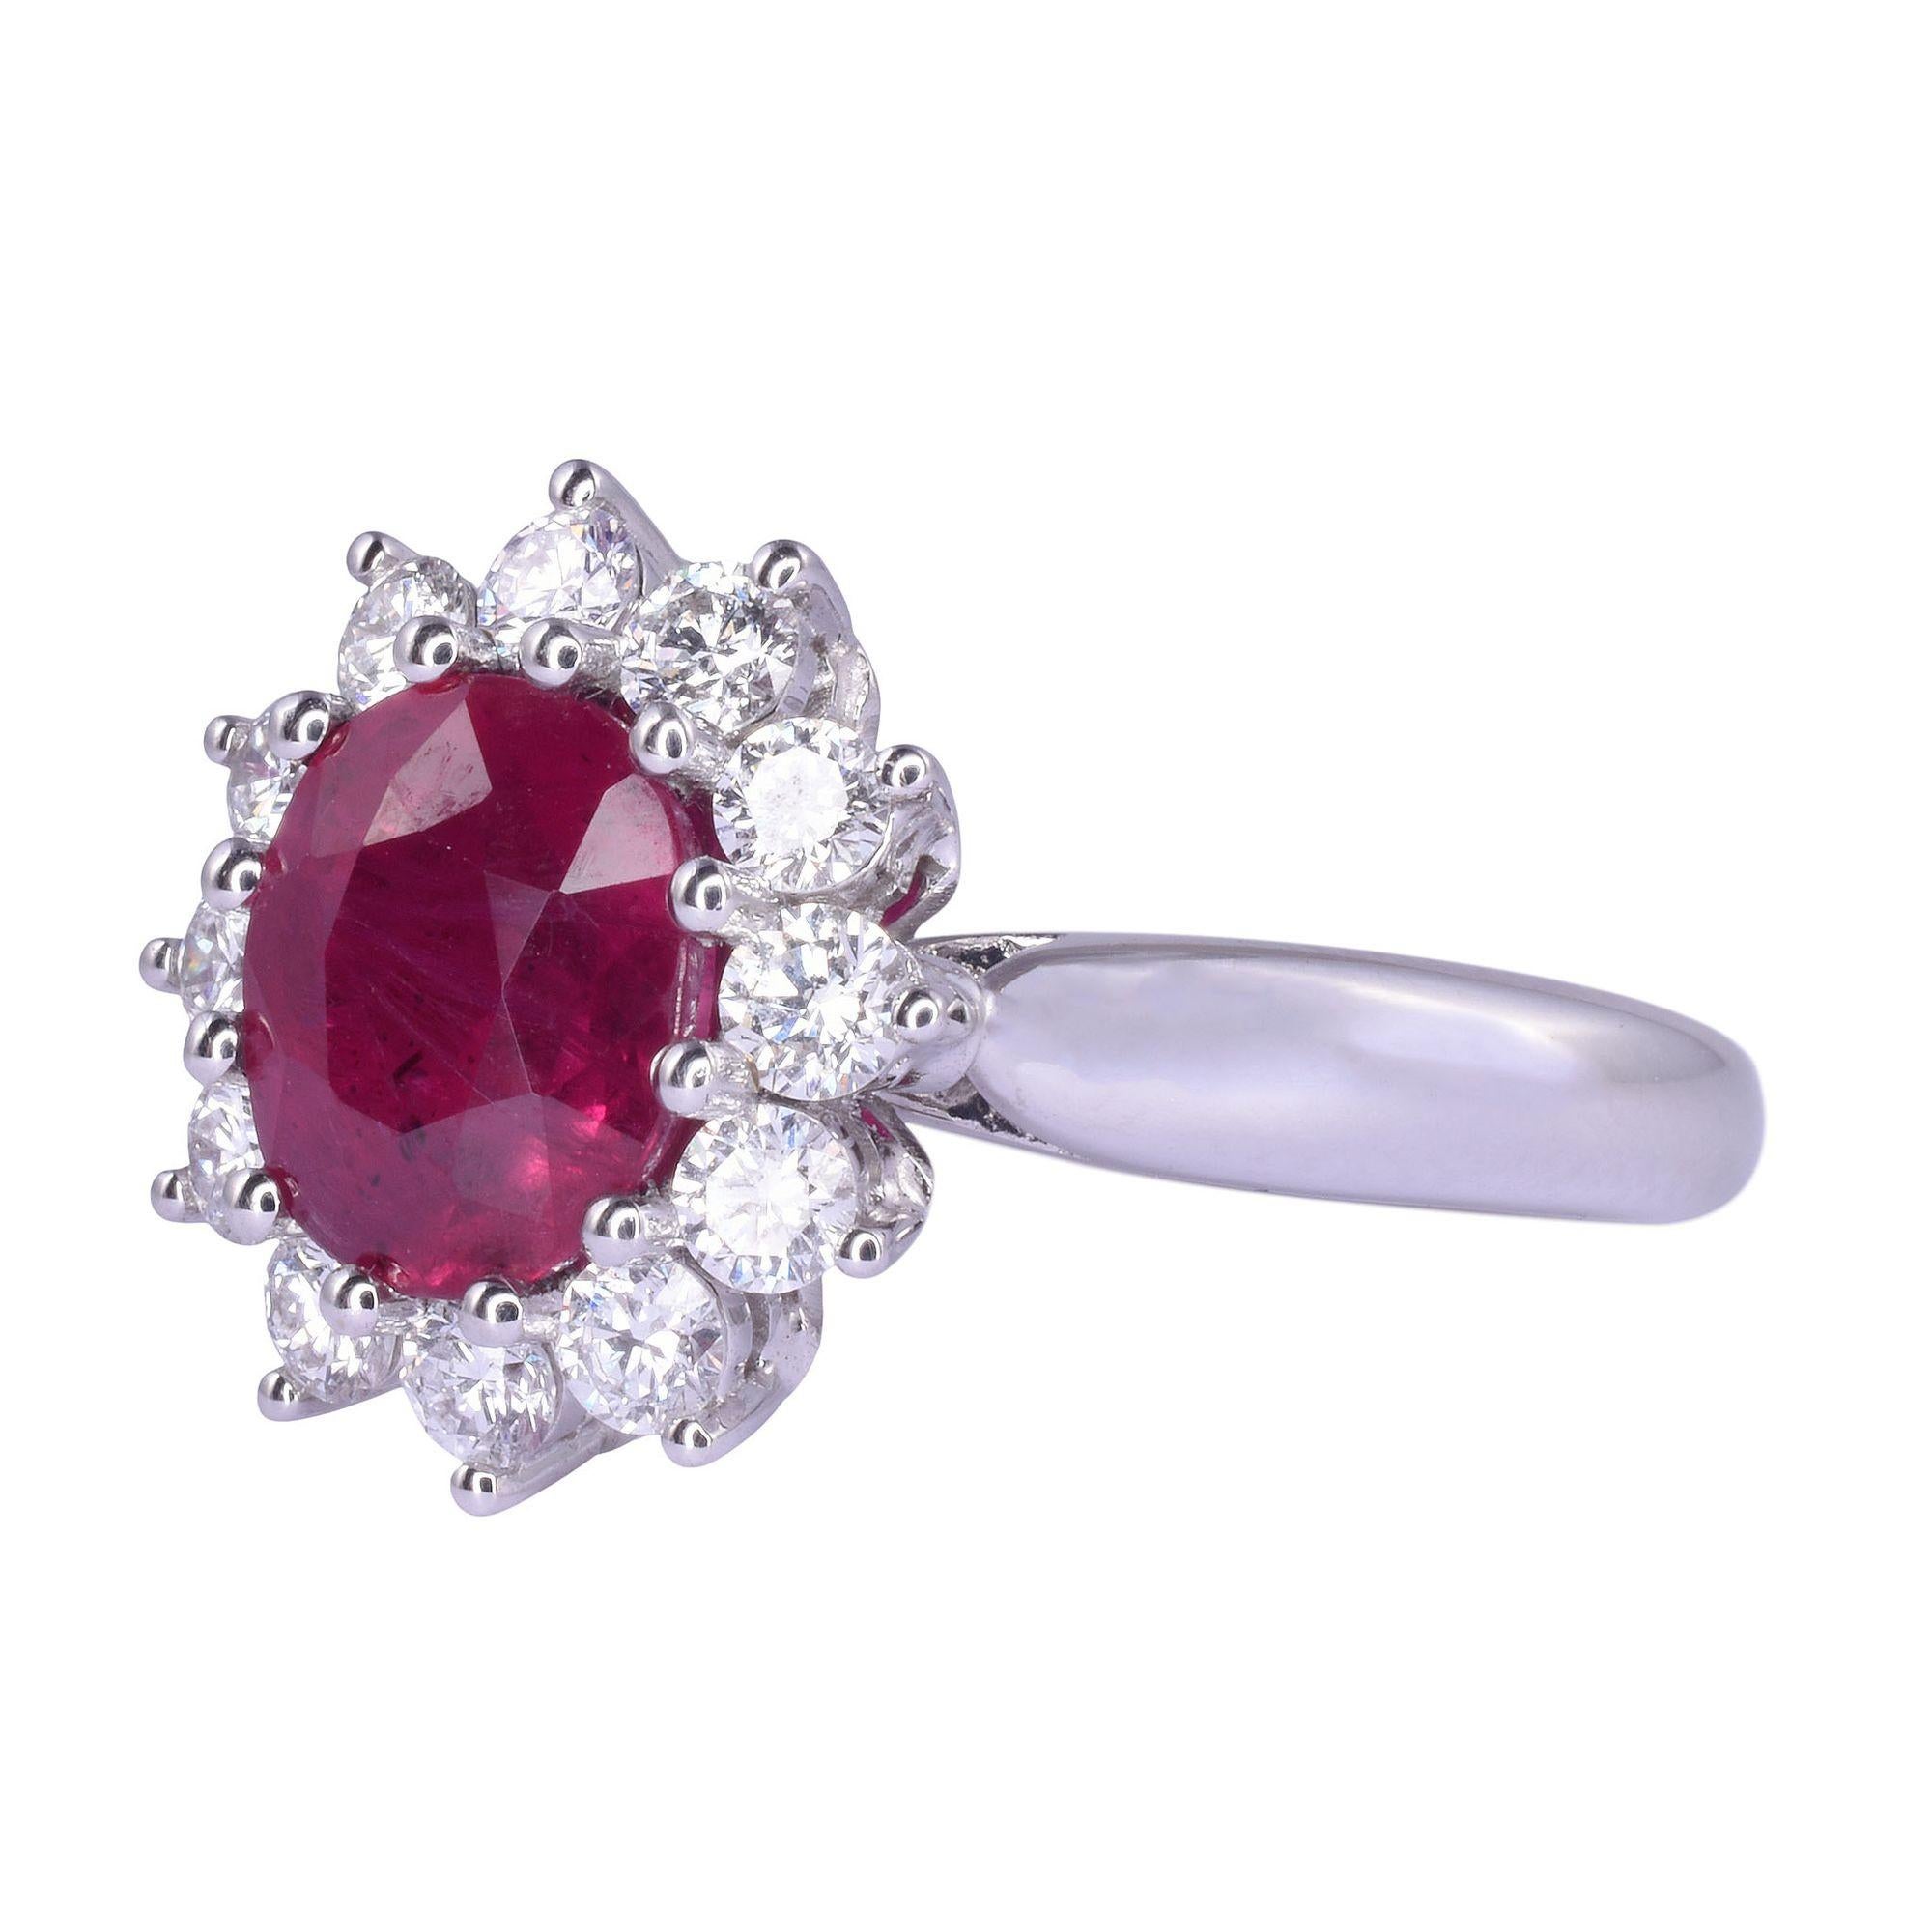 Estate vibrant ruby & diamond 18KW ring. This 18 karat white gold ring features an oval ruby at 1.98 carats. The ruby is very slightly purplish red with strong saturation and has been heat treated, as are most rubies. It is accented with 12 round